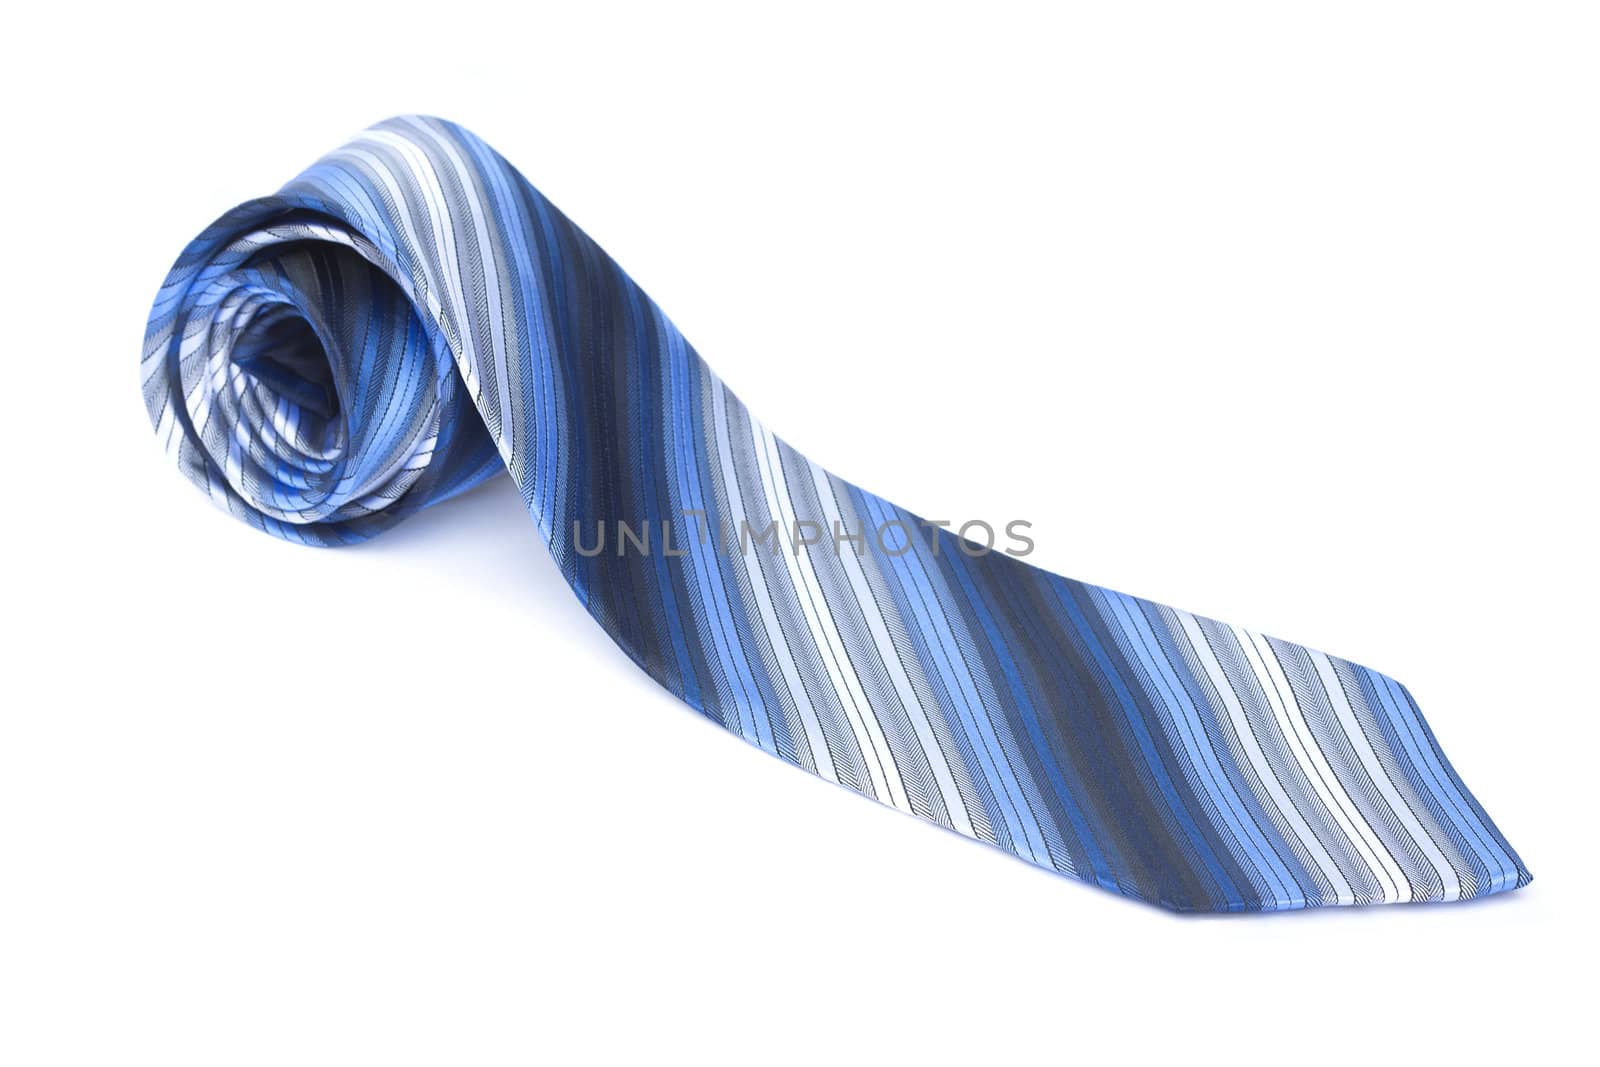 Blue striped tie isolated over a white background.